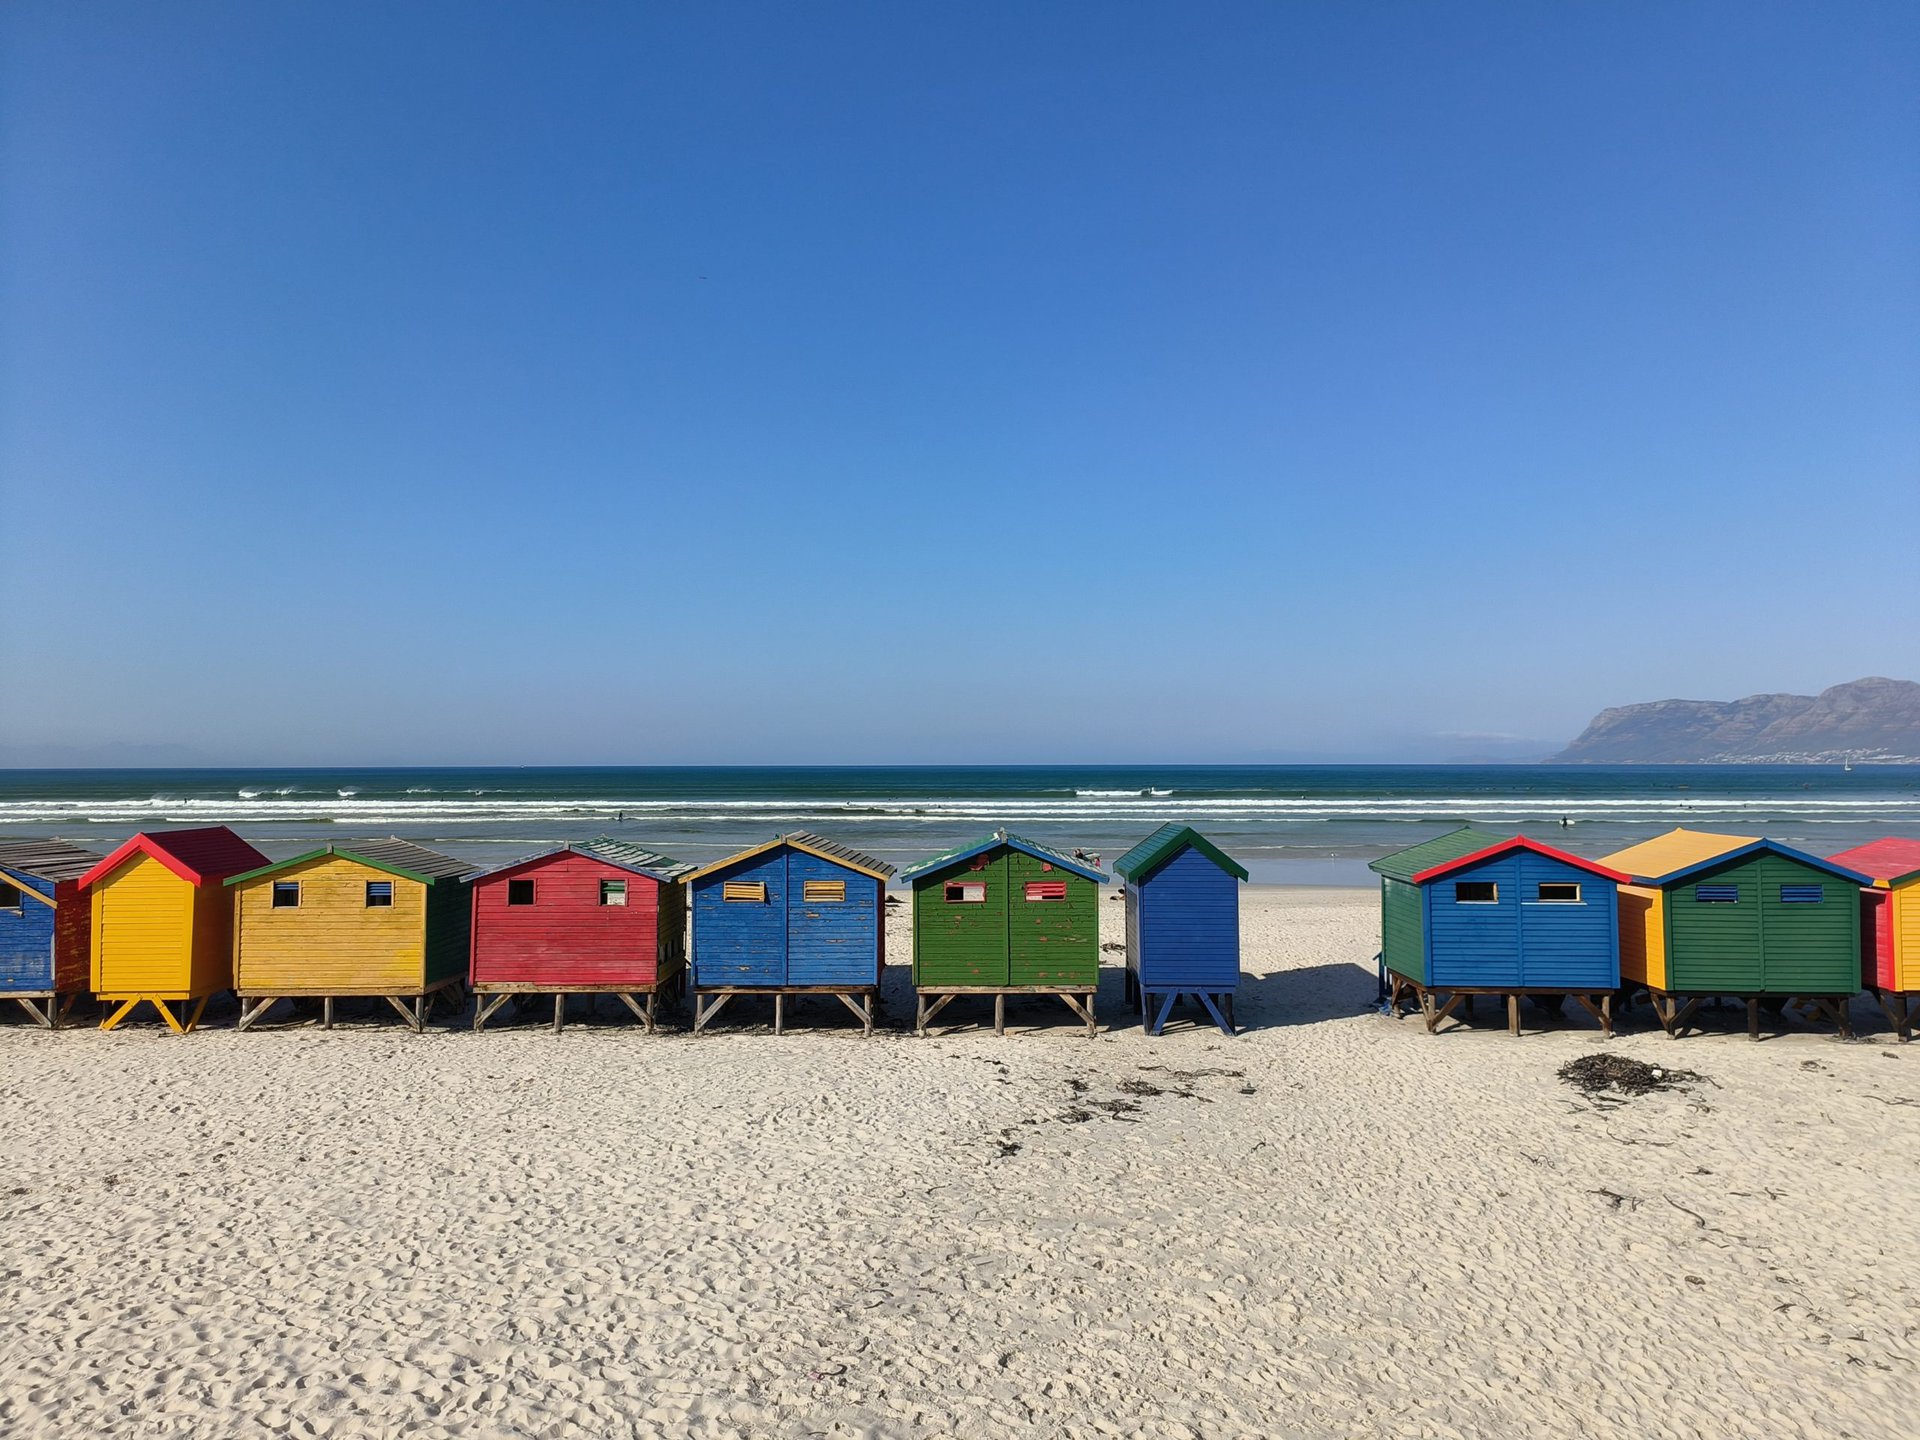 Oppo Reno 8 Pro 1x shot of colorful beach huts on a sandy beach.